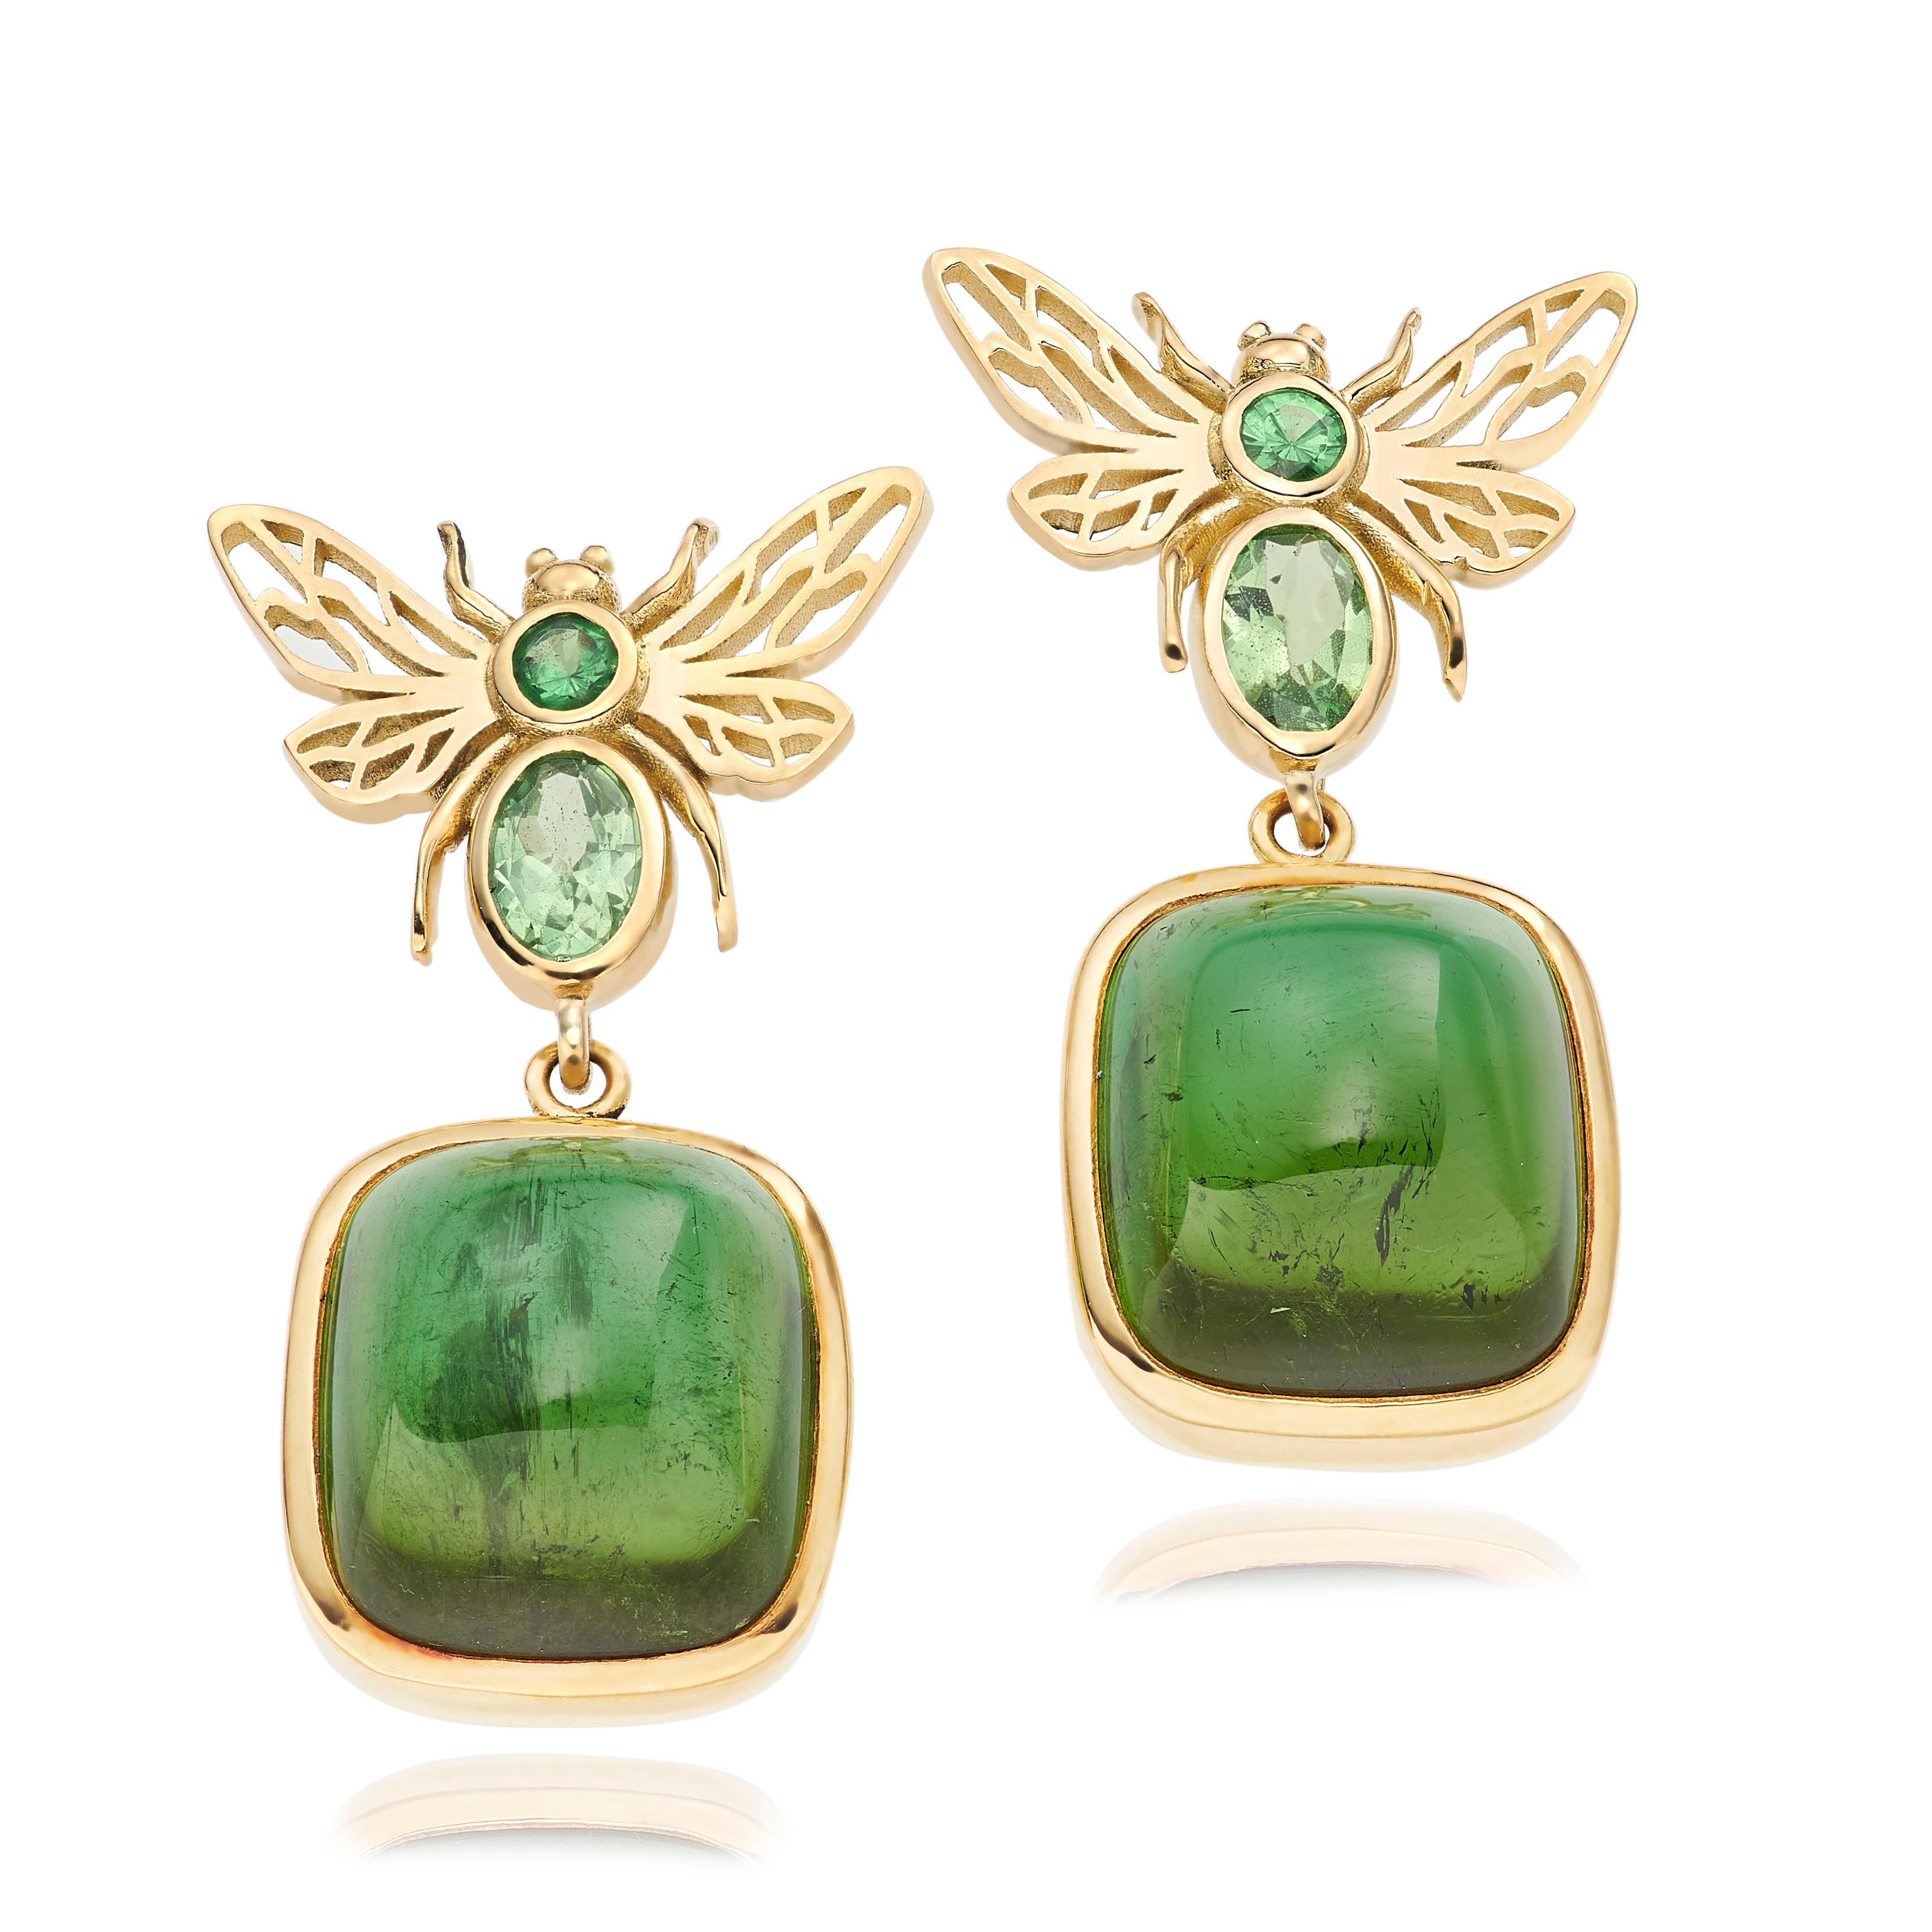 A pair of statement cocktail earrings from Lilly Hastedt's Fauna collection.  The earrings are set with sparkling Tsavorites and green Tourmaline cabochons. The cabochons are detachable so the bees can be worn on their own. The gemstones are of the